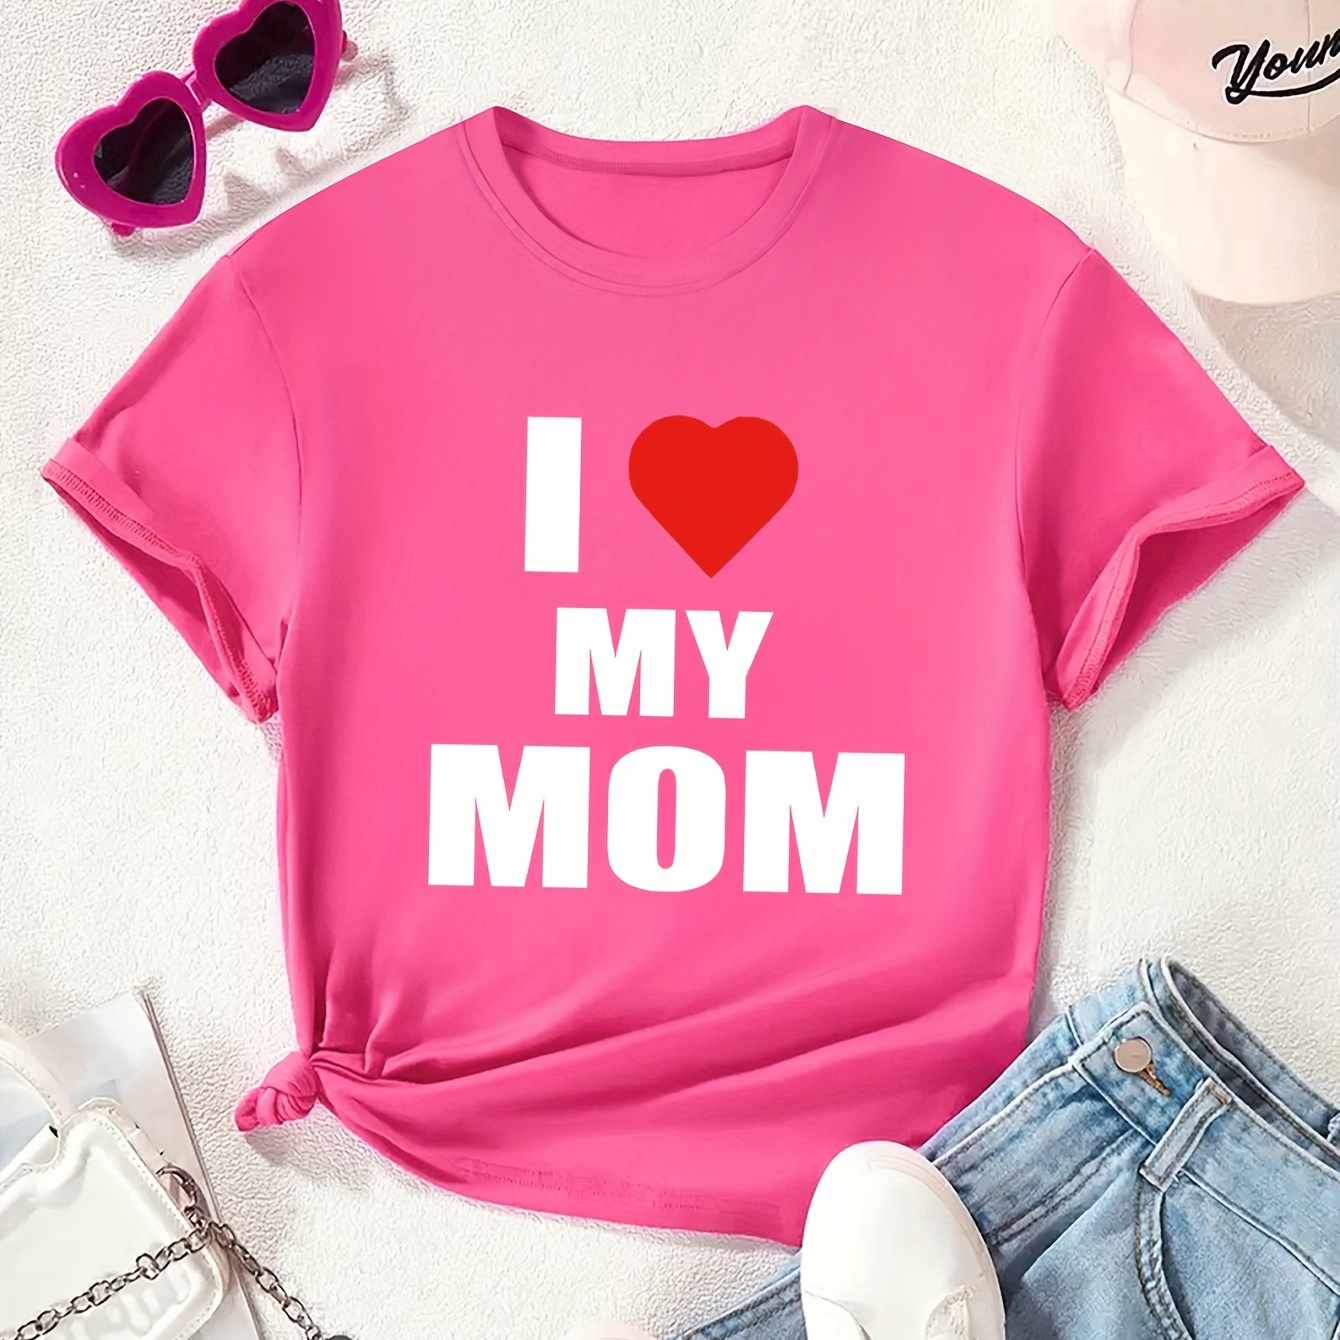 

I Love My Mom Print, Girls' Casual Crew Neck Short Sleeve T-shirt, Comfy Top Clothes For Spring And Summer For Outdoor Activities